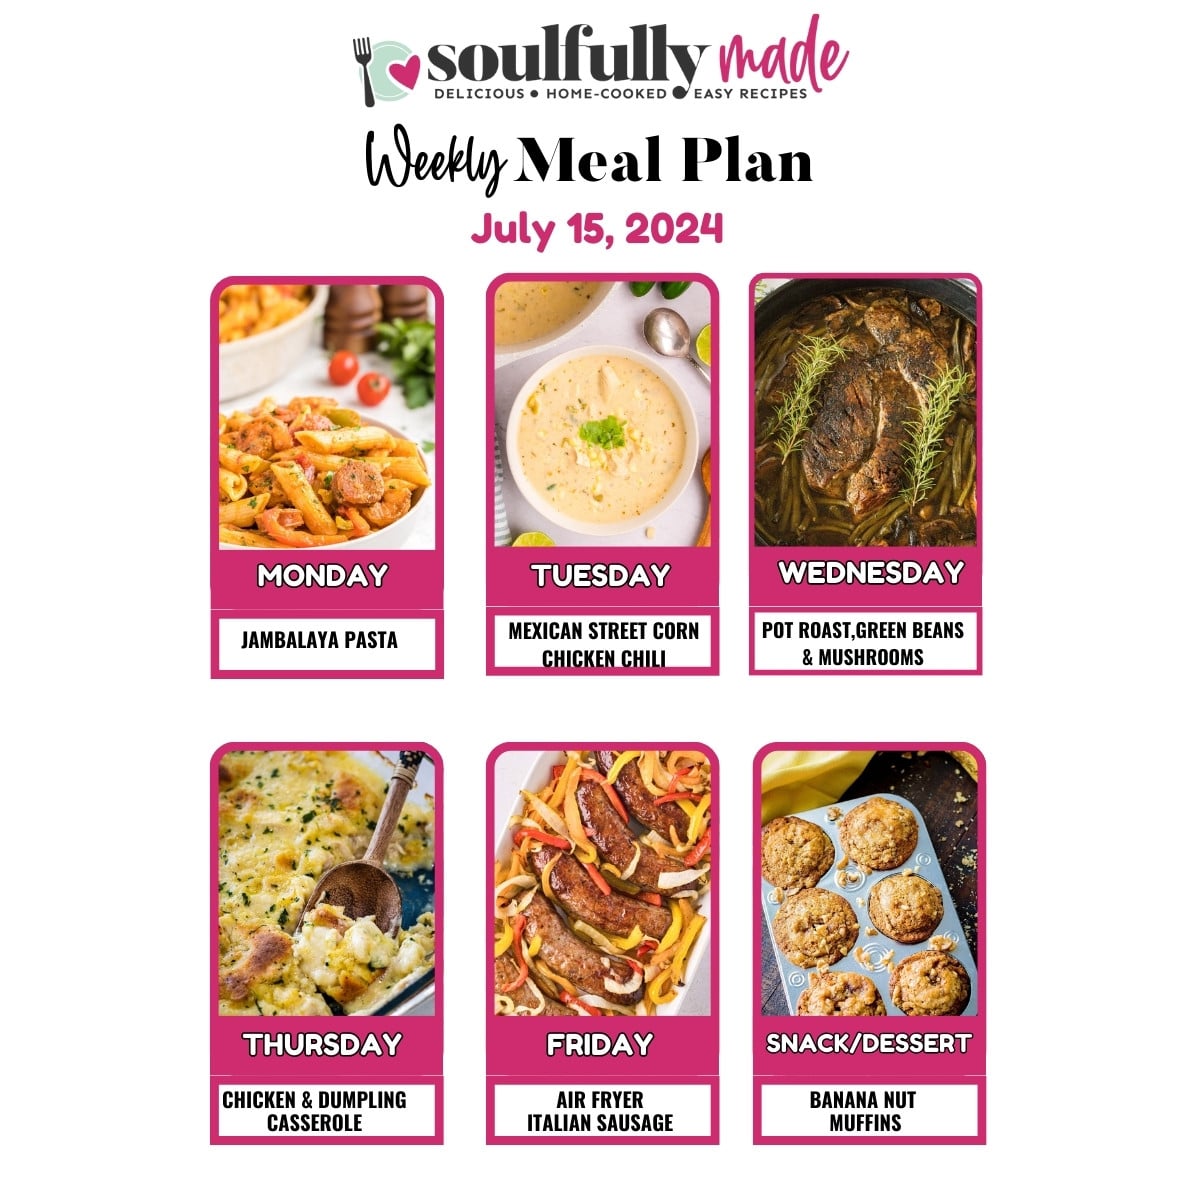 Weekly Meal Plan July 15, 2024